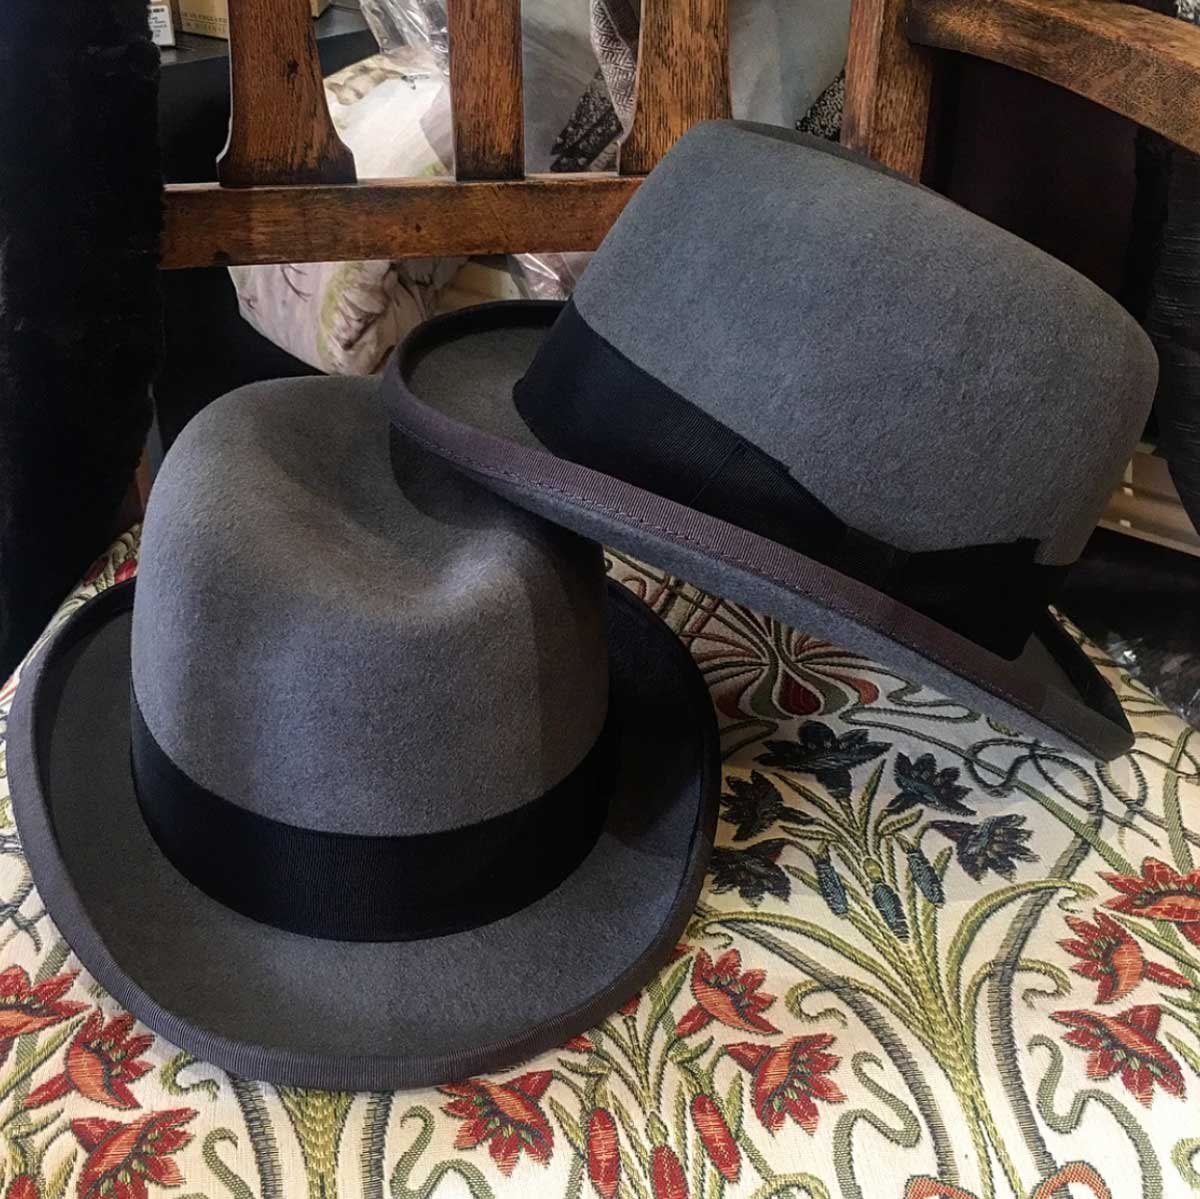 What You Need to Know About the Homburg Hat